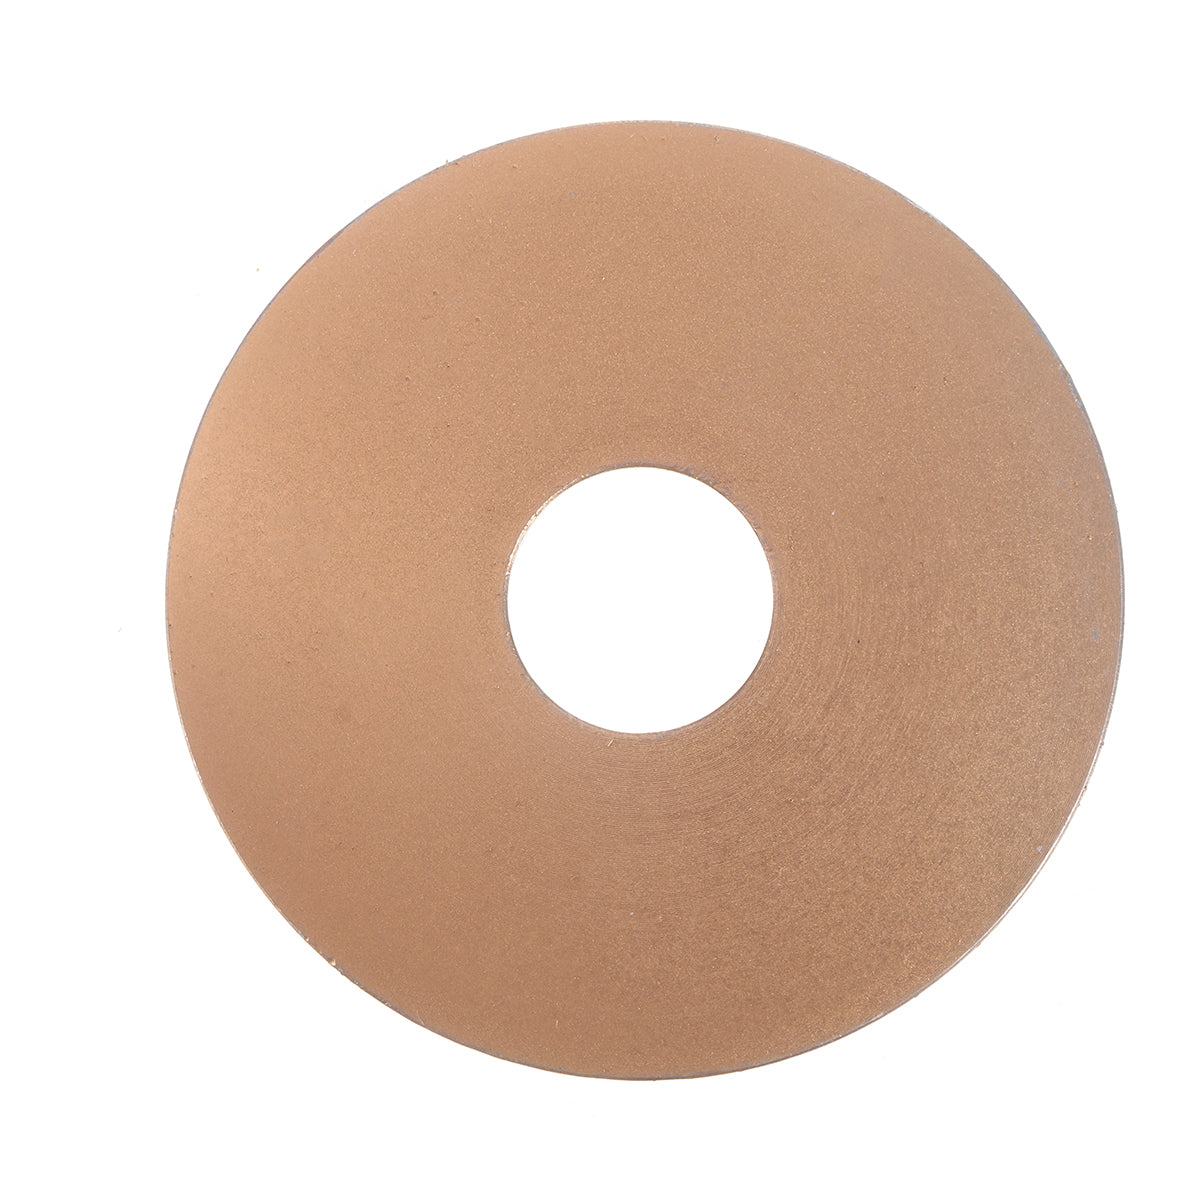 73mm Wood Carving Shaping Disc Woodworking Sanding Plastic Barbed Disc 45 Degree Angle Grinder